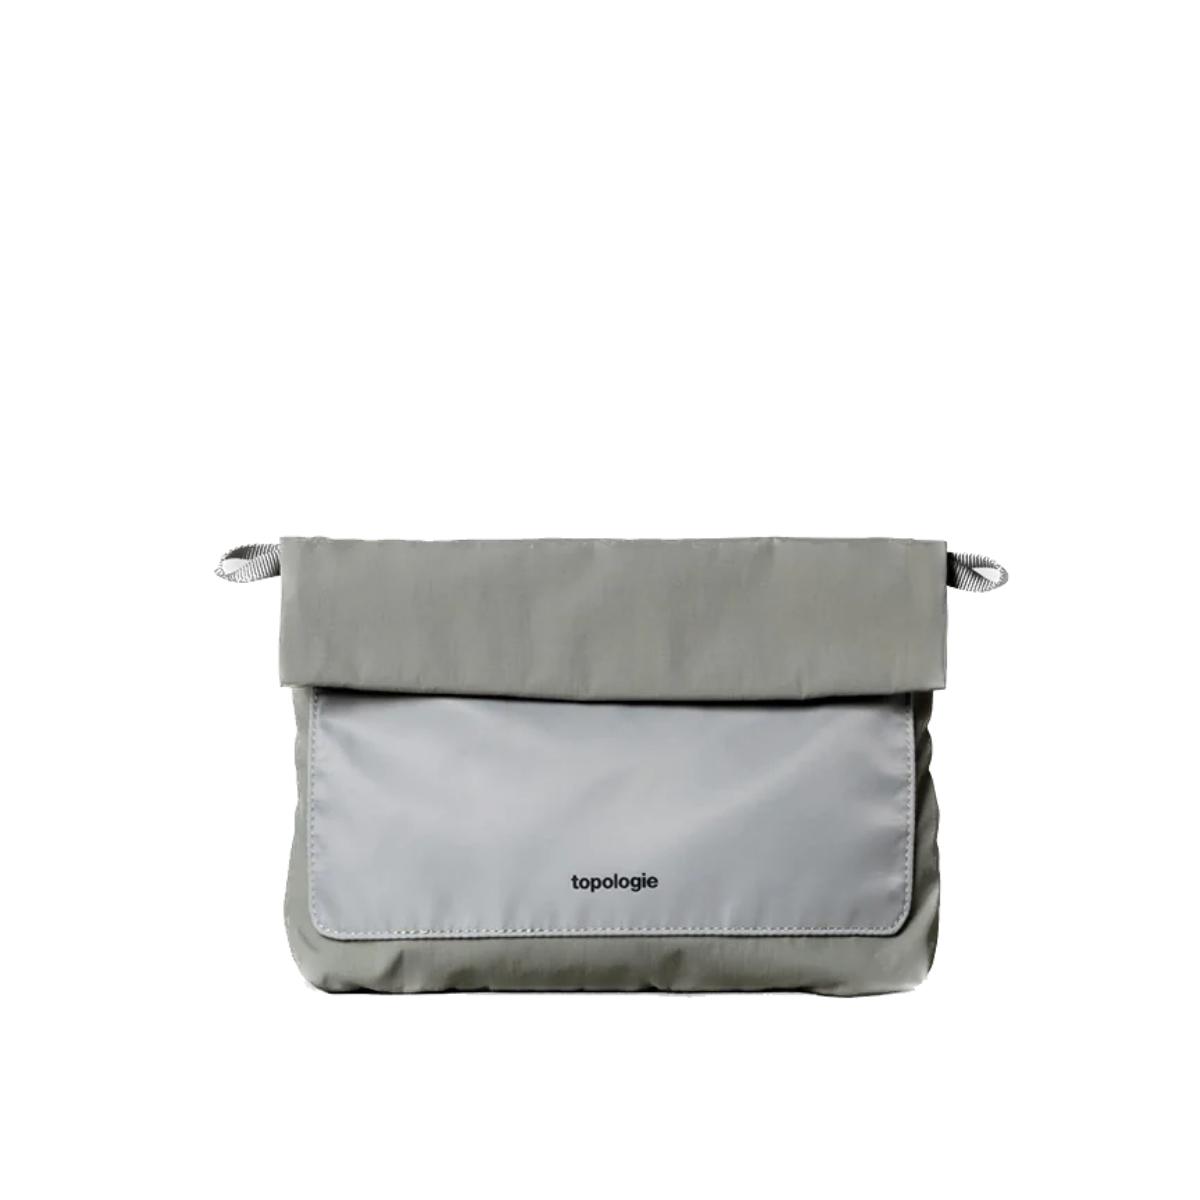 Topologie Wares Bags Musette Moss Light in Gray | Lyst